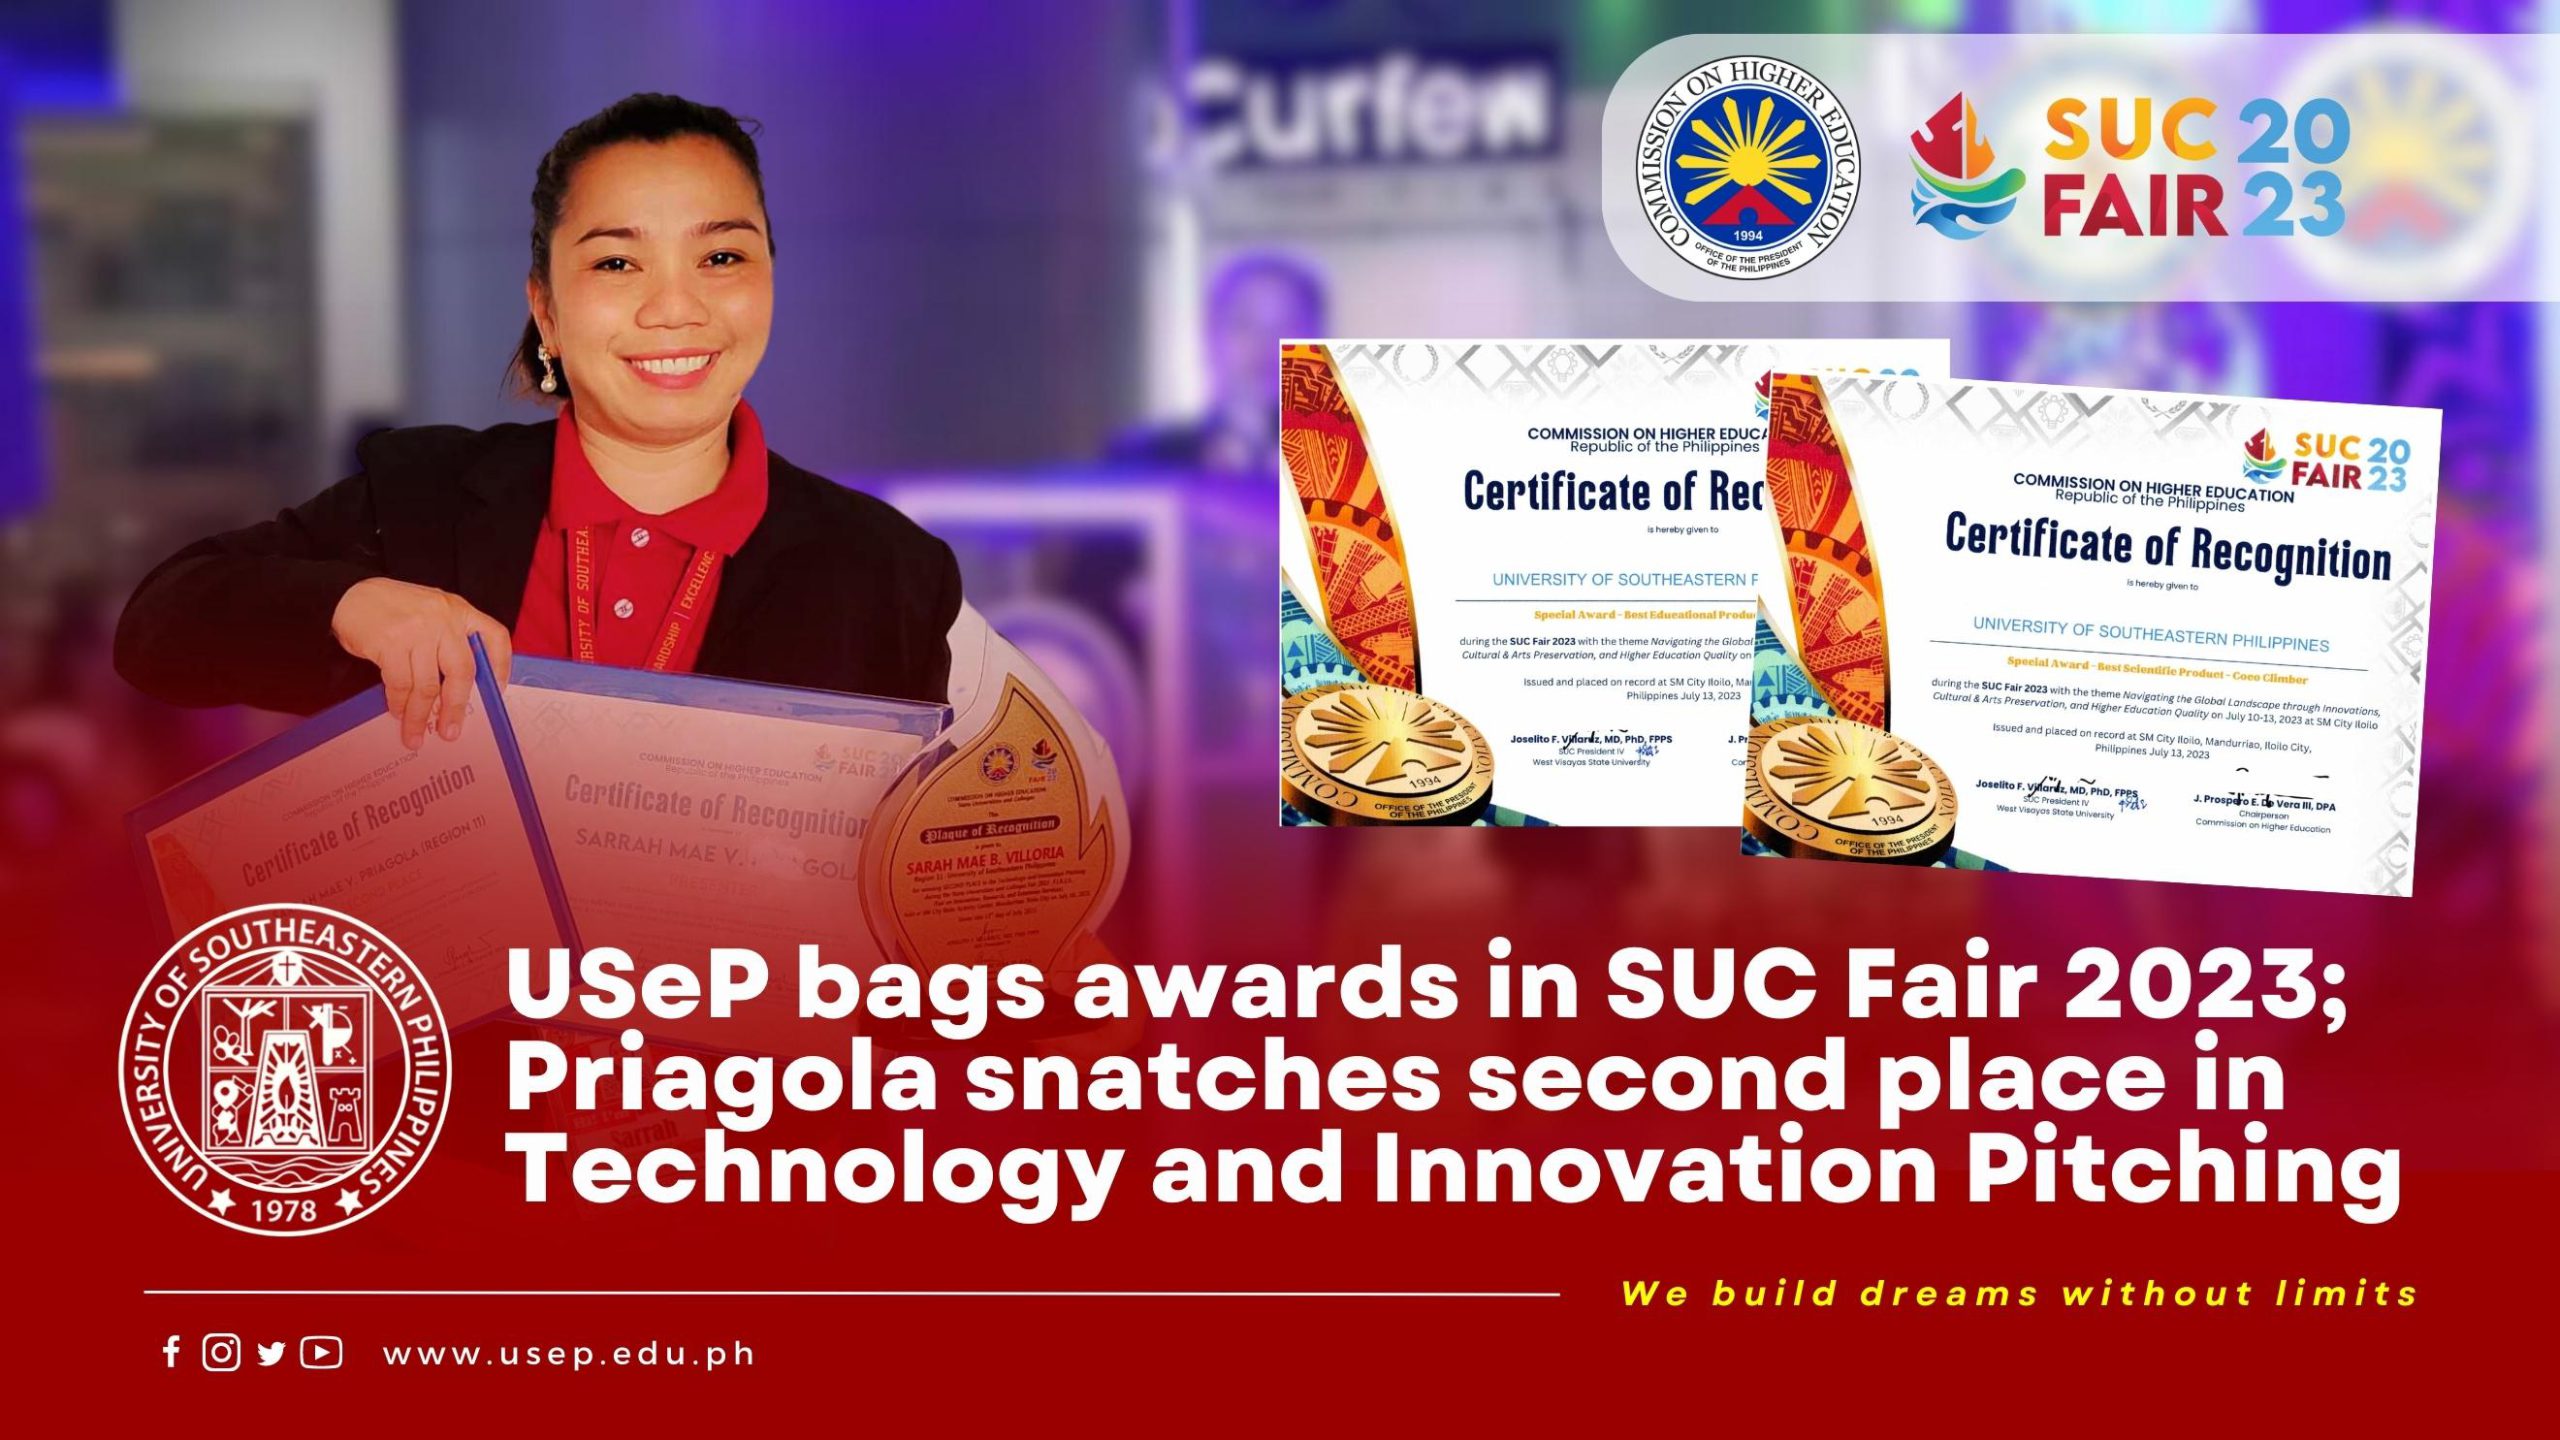 USeP bags awards in SUC Fair 2023; Priagola snatches second place in Technology and Innovation Pitching